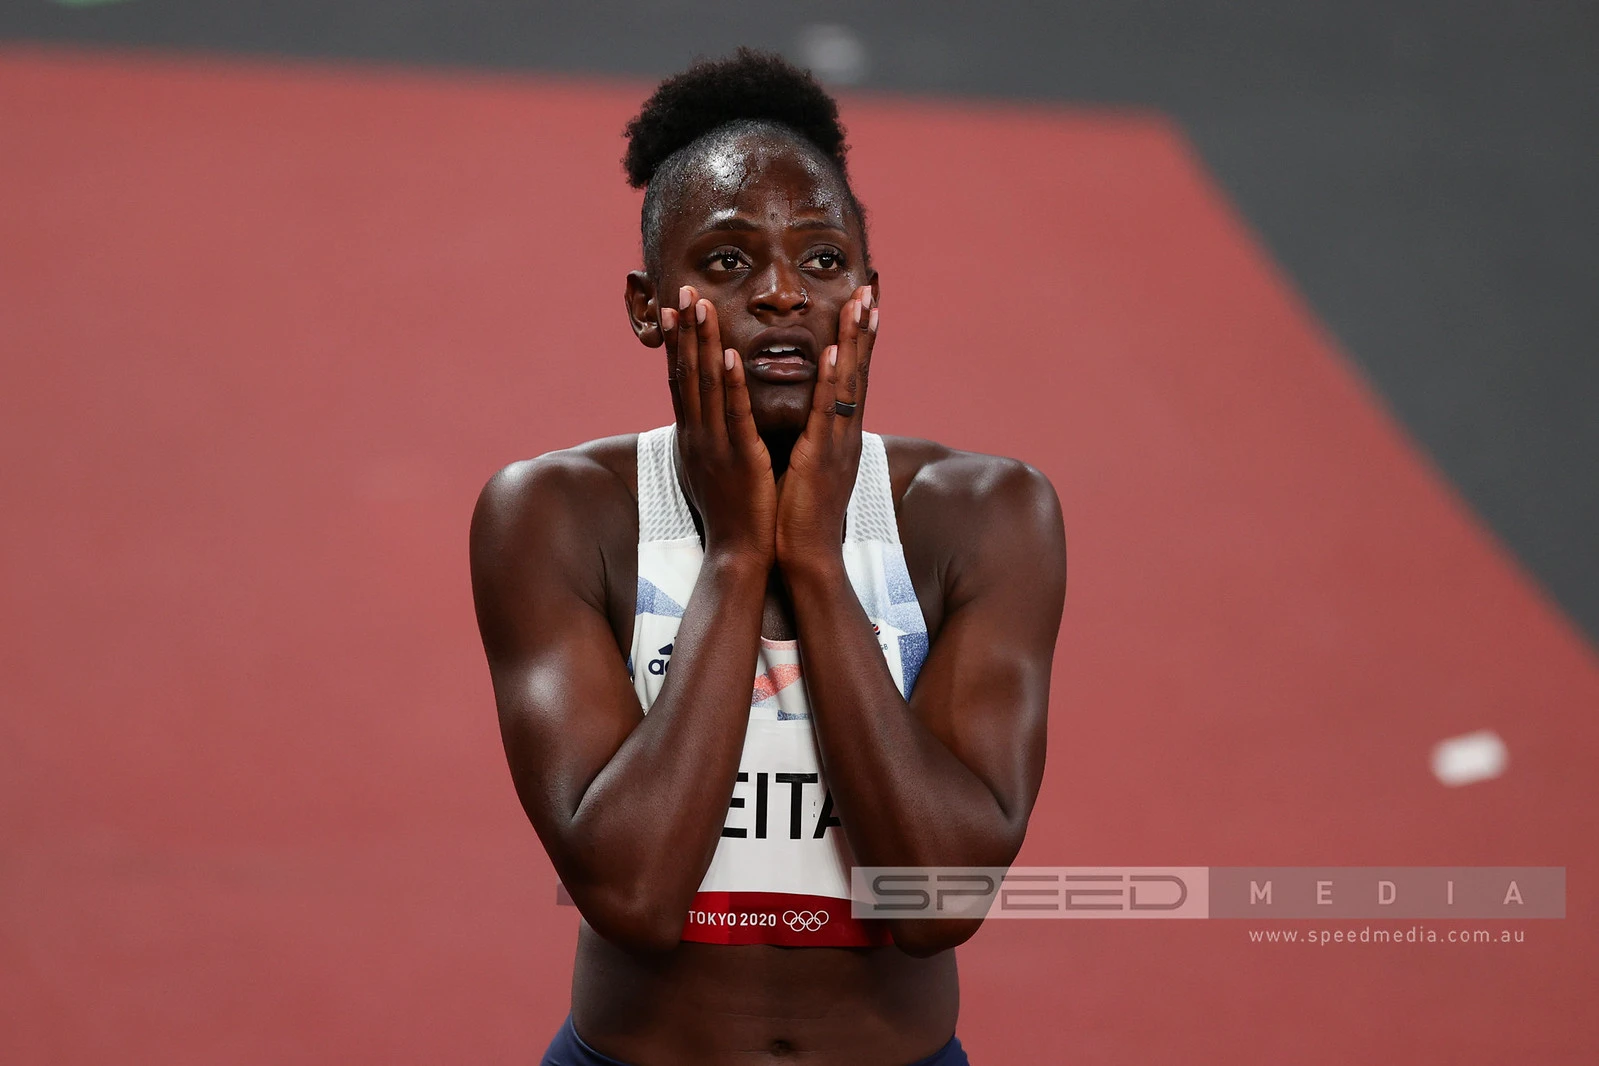 Daryll Neita looks on after her race at the 2021 Tokyo Olympic Games